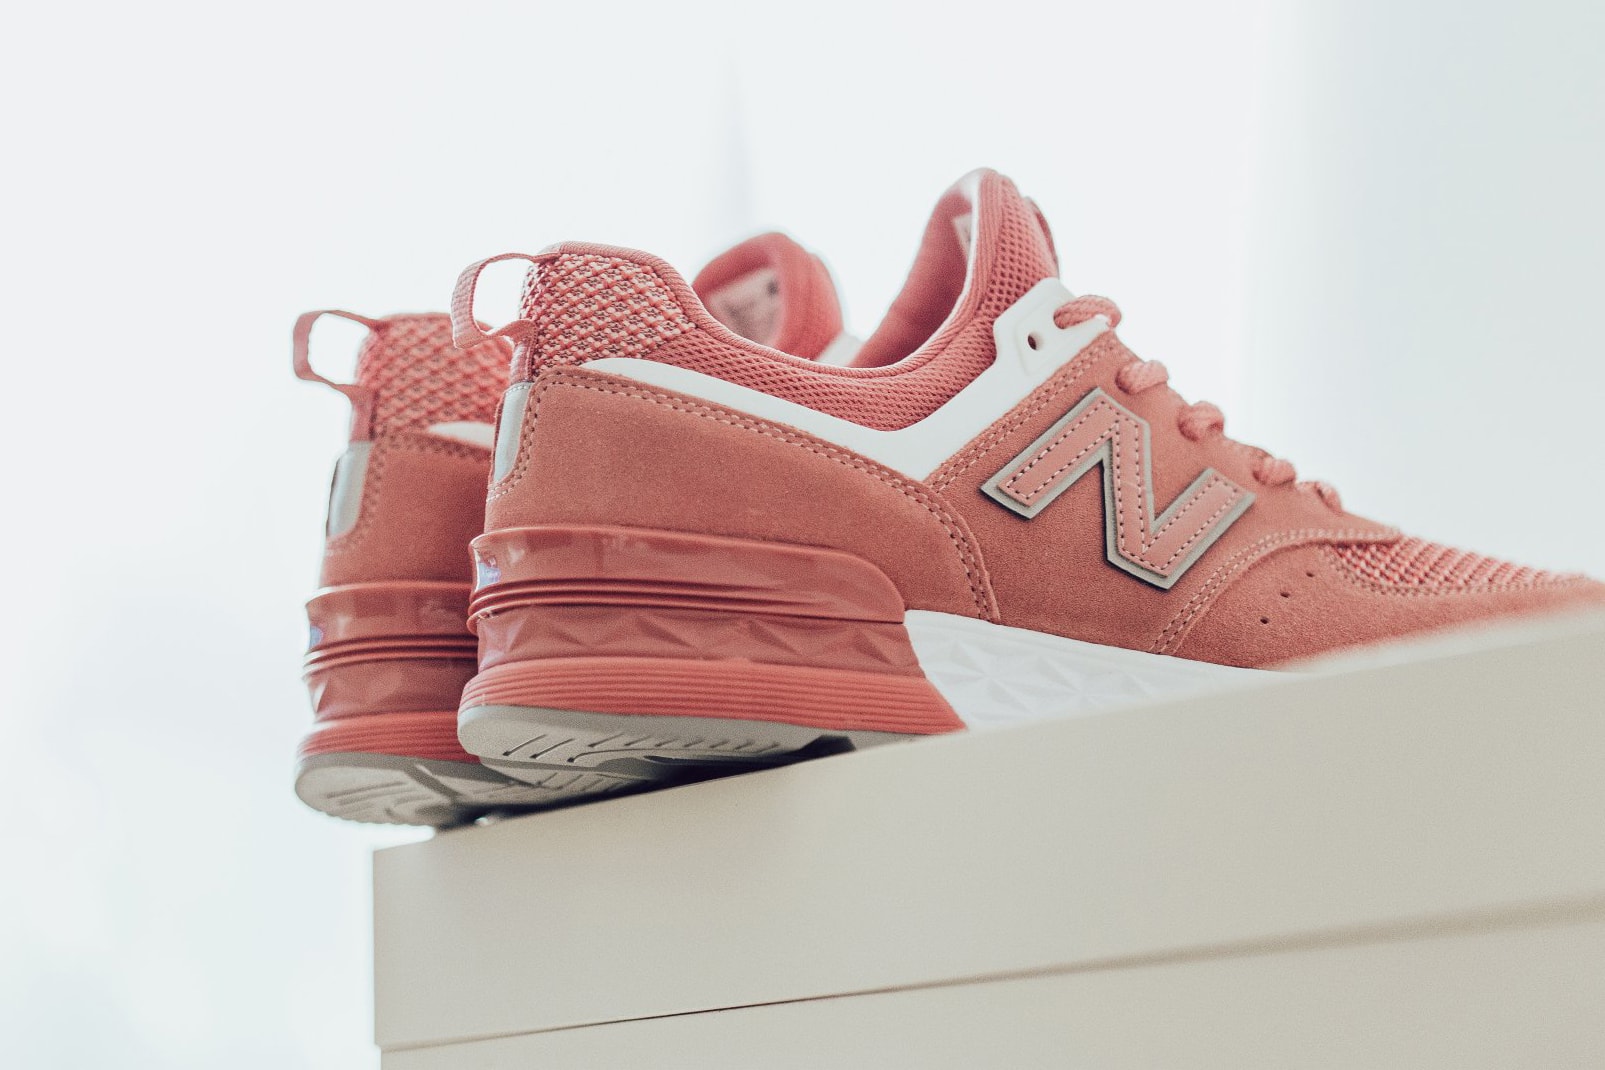 New Balance 574 Sport Dusted Peach 2018 february release date info sneakers shoes footwear feature